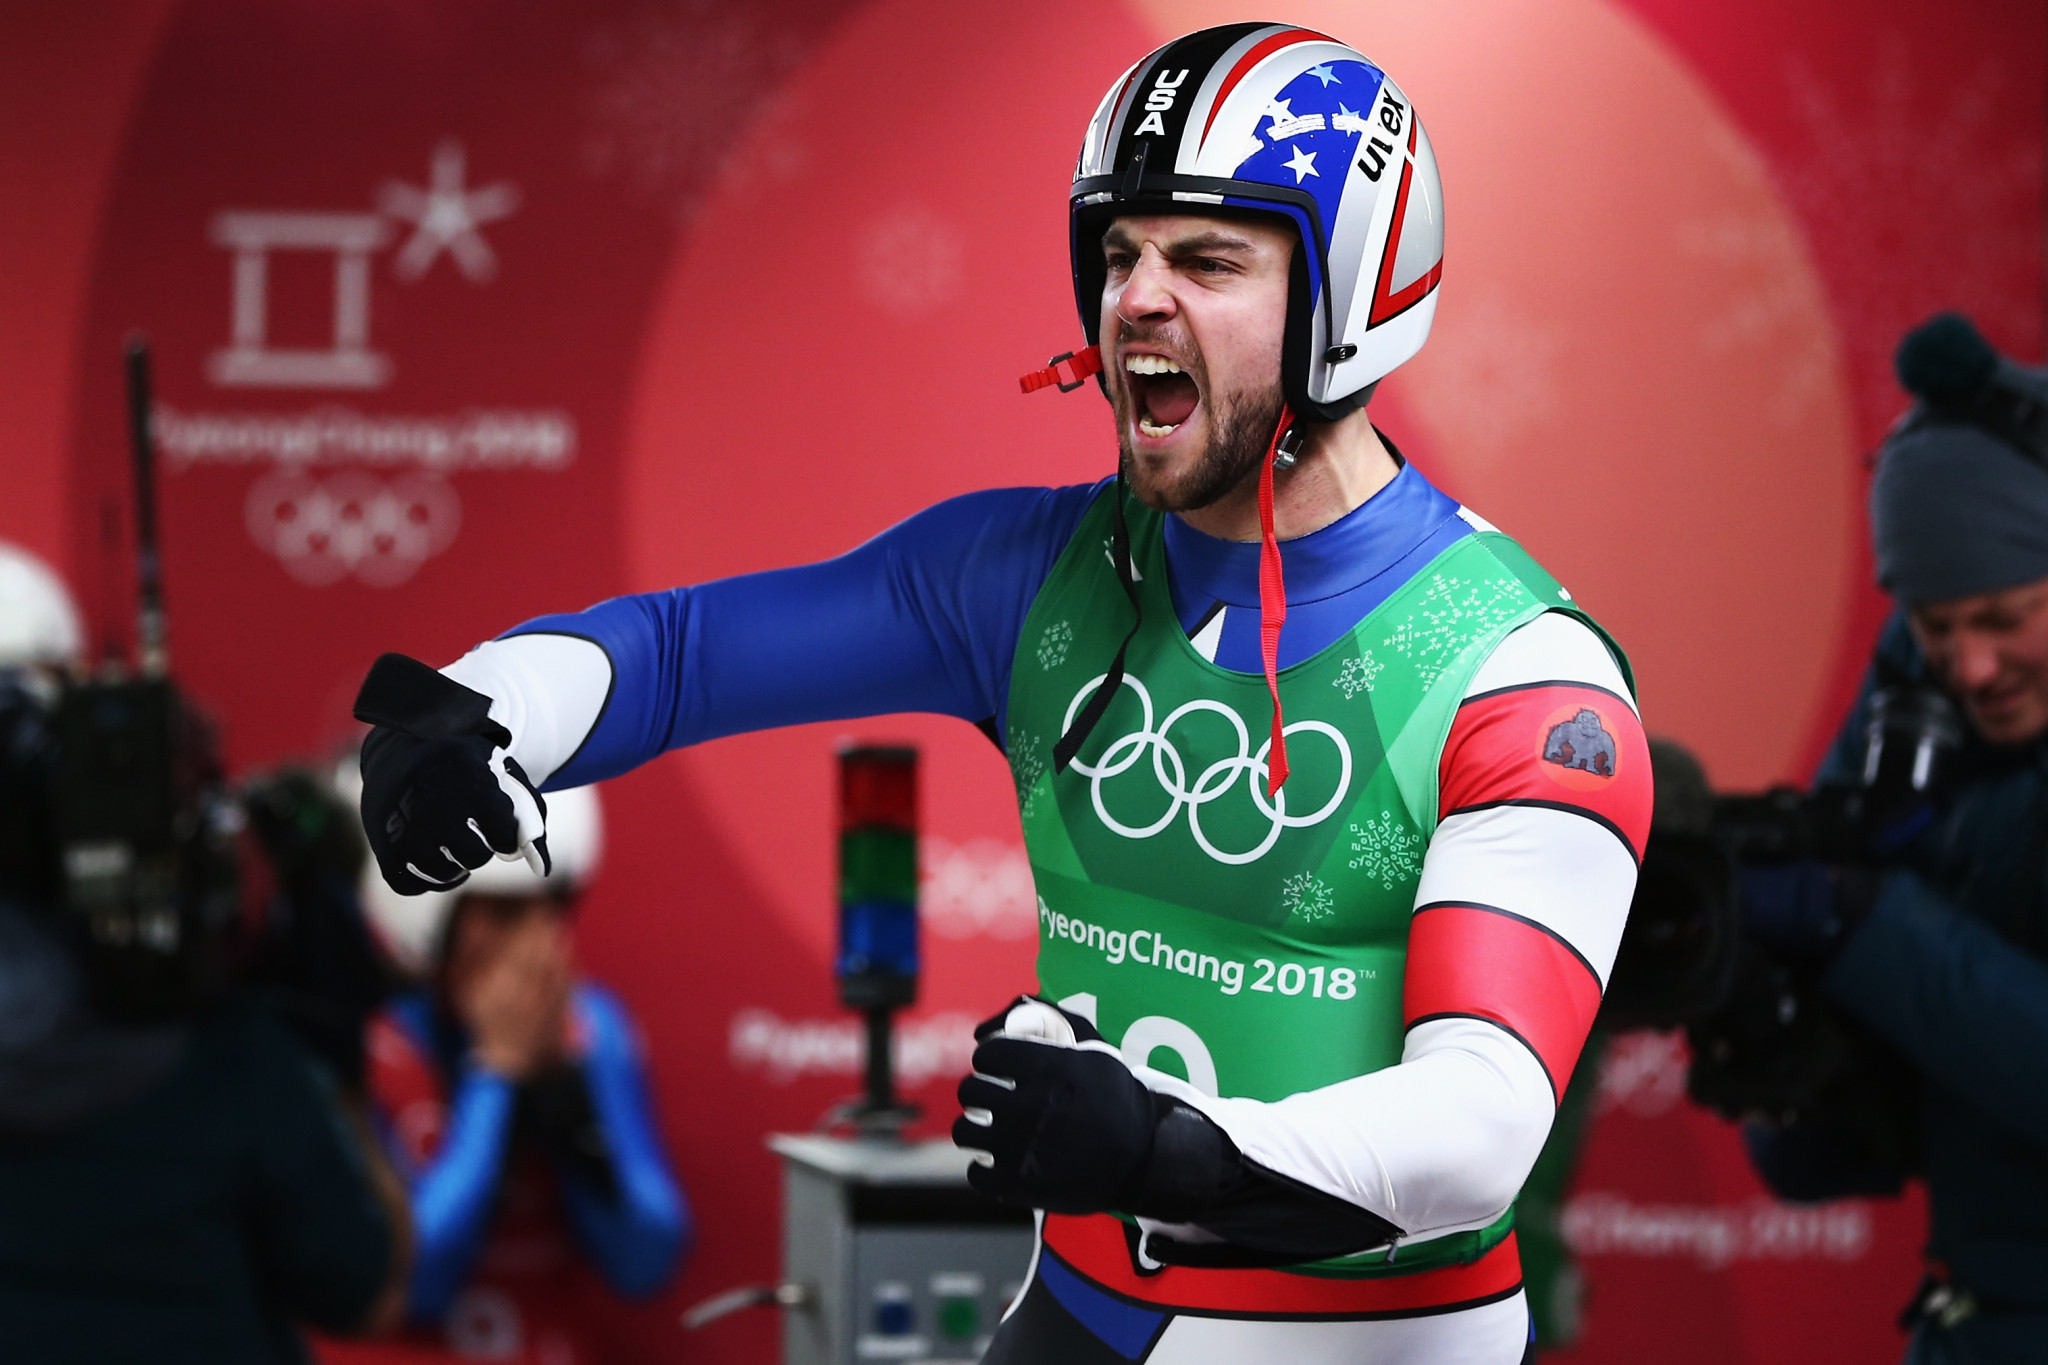 The United States' Chris Mazdzer won the men's singles luge silver medal at the Pyeongchang 2018 Winter Olympic Games ©Getty Images